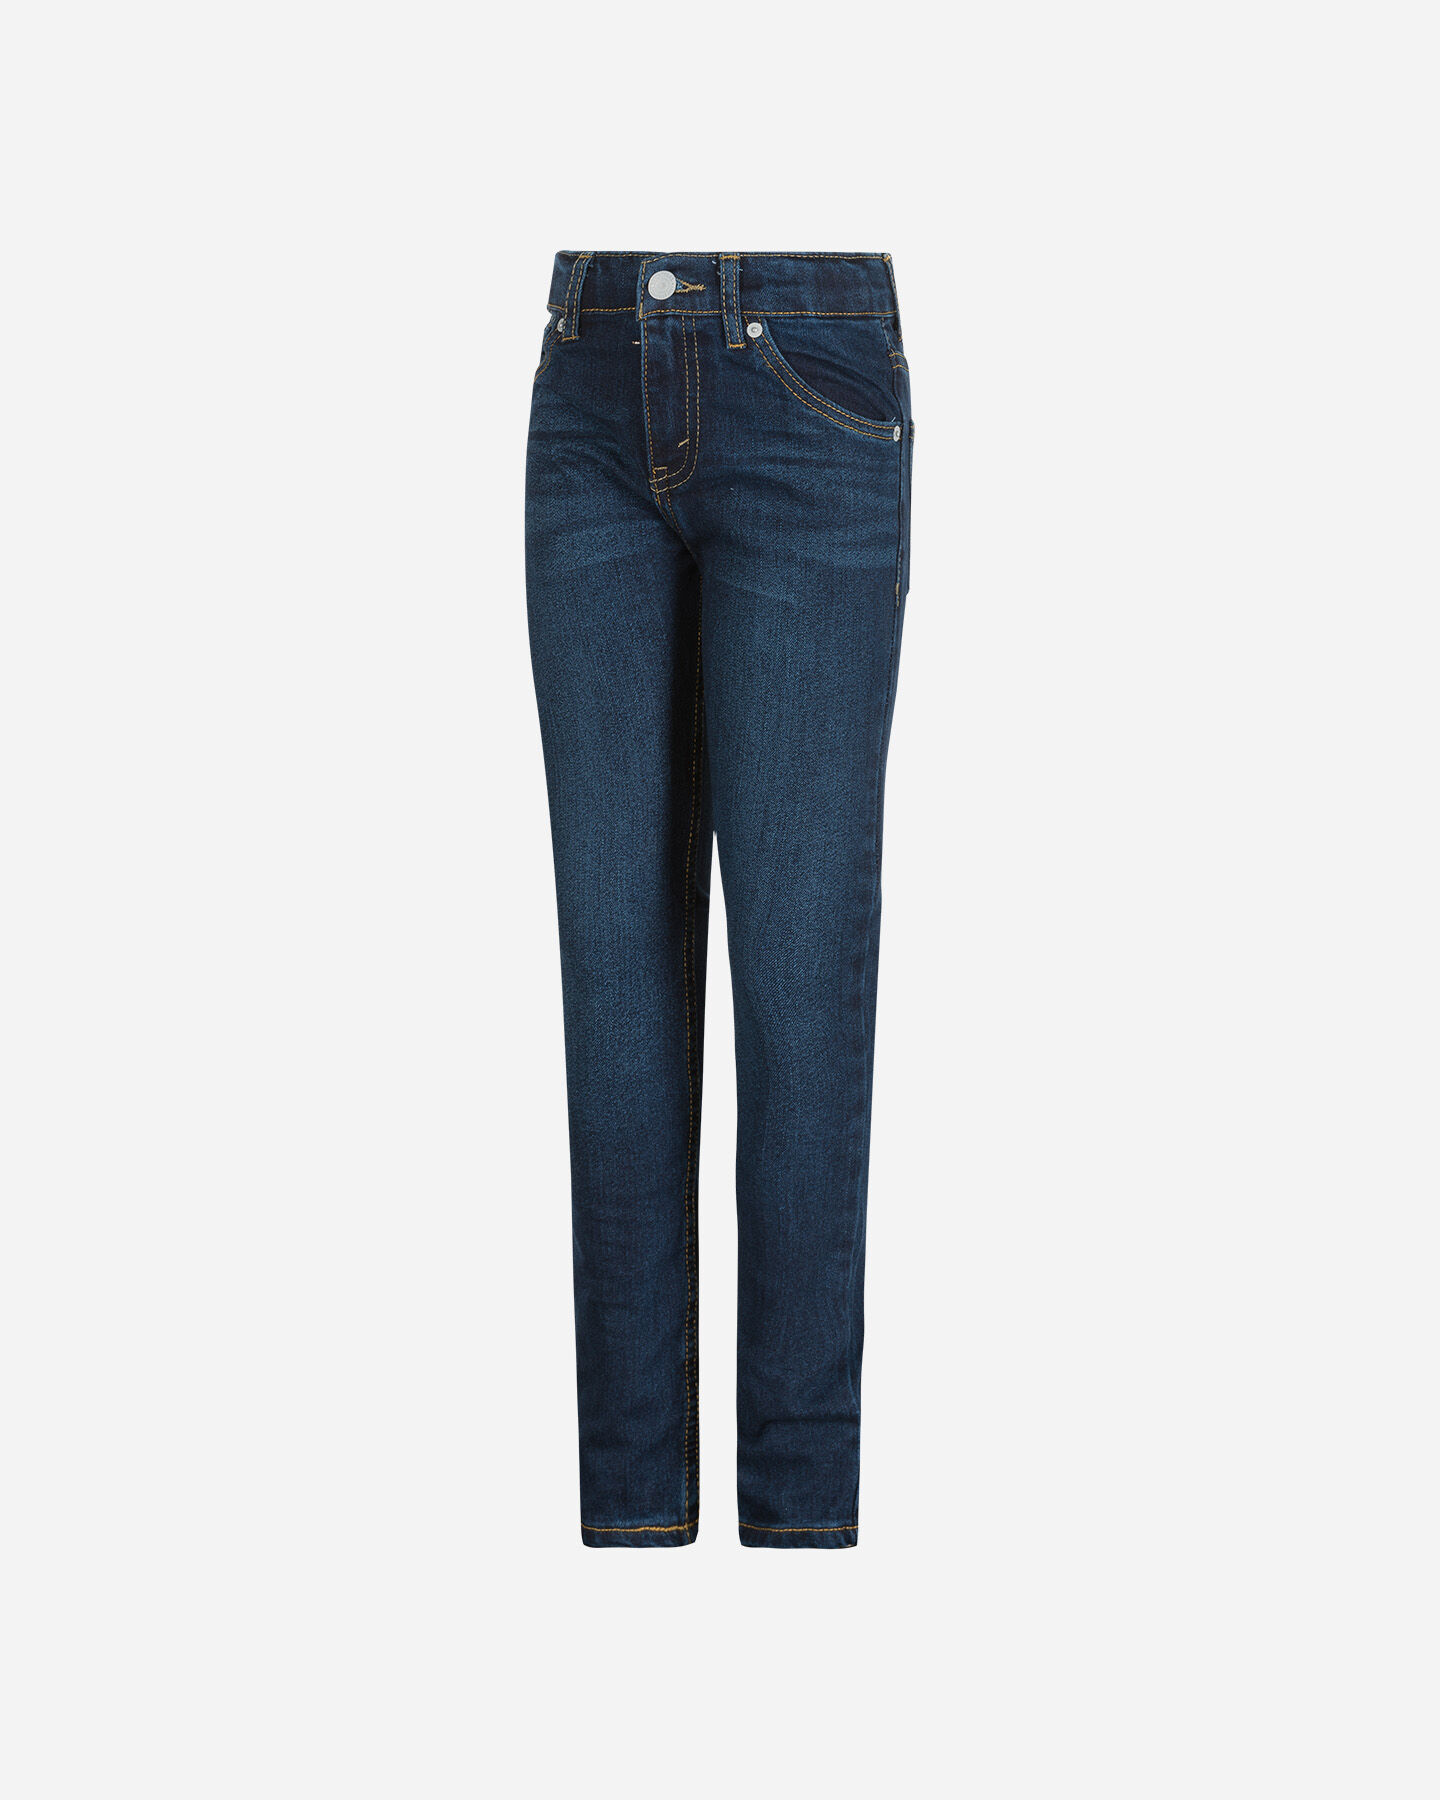  Jeans LEVI'S 510 SKINNY JR S4083742|D5W|6A scatto 0